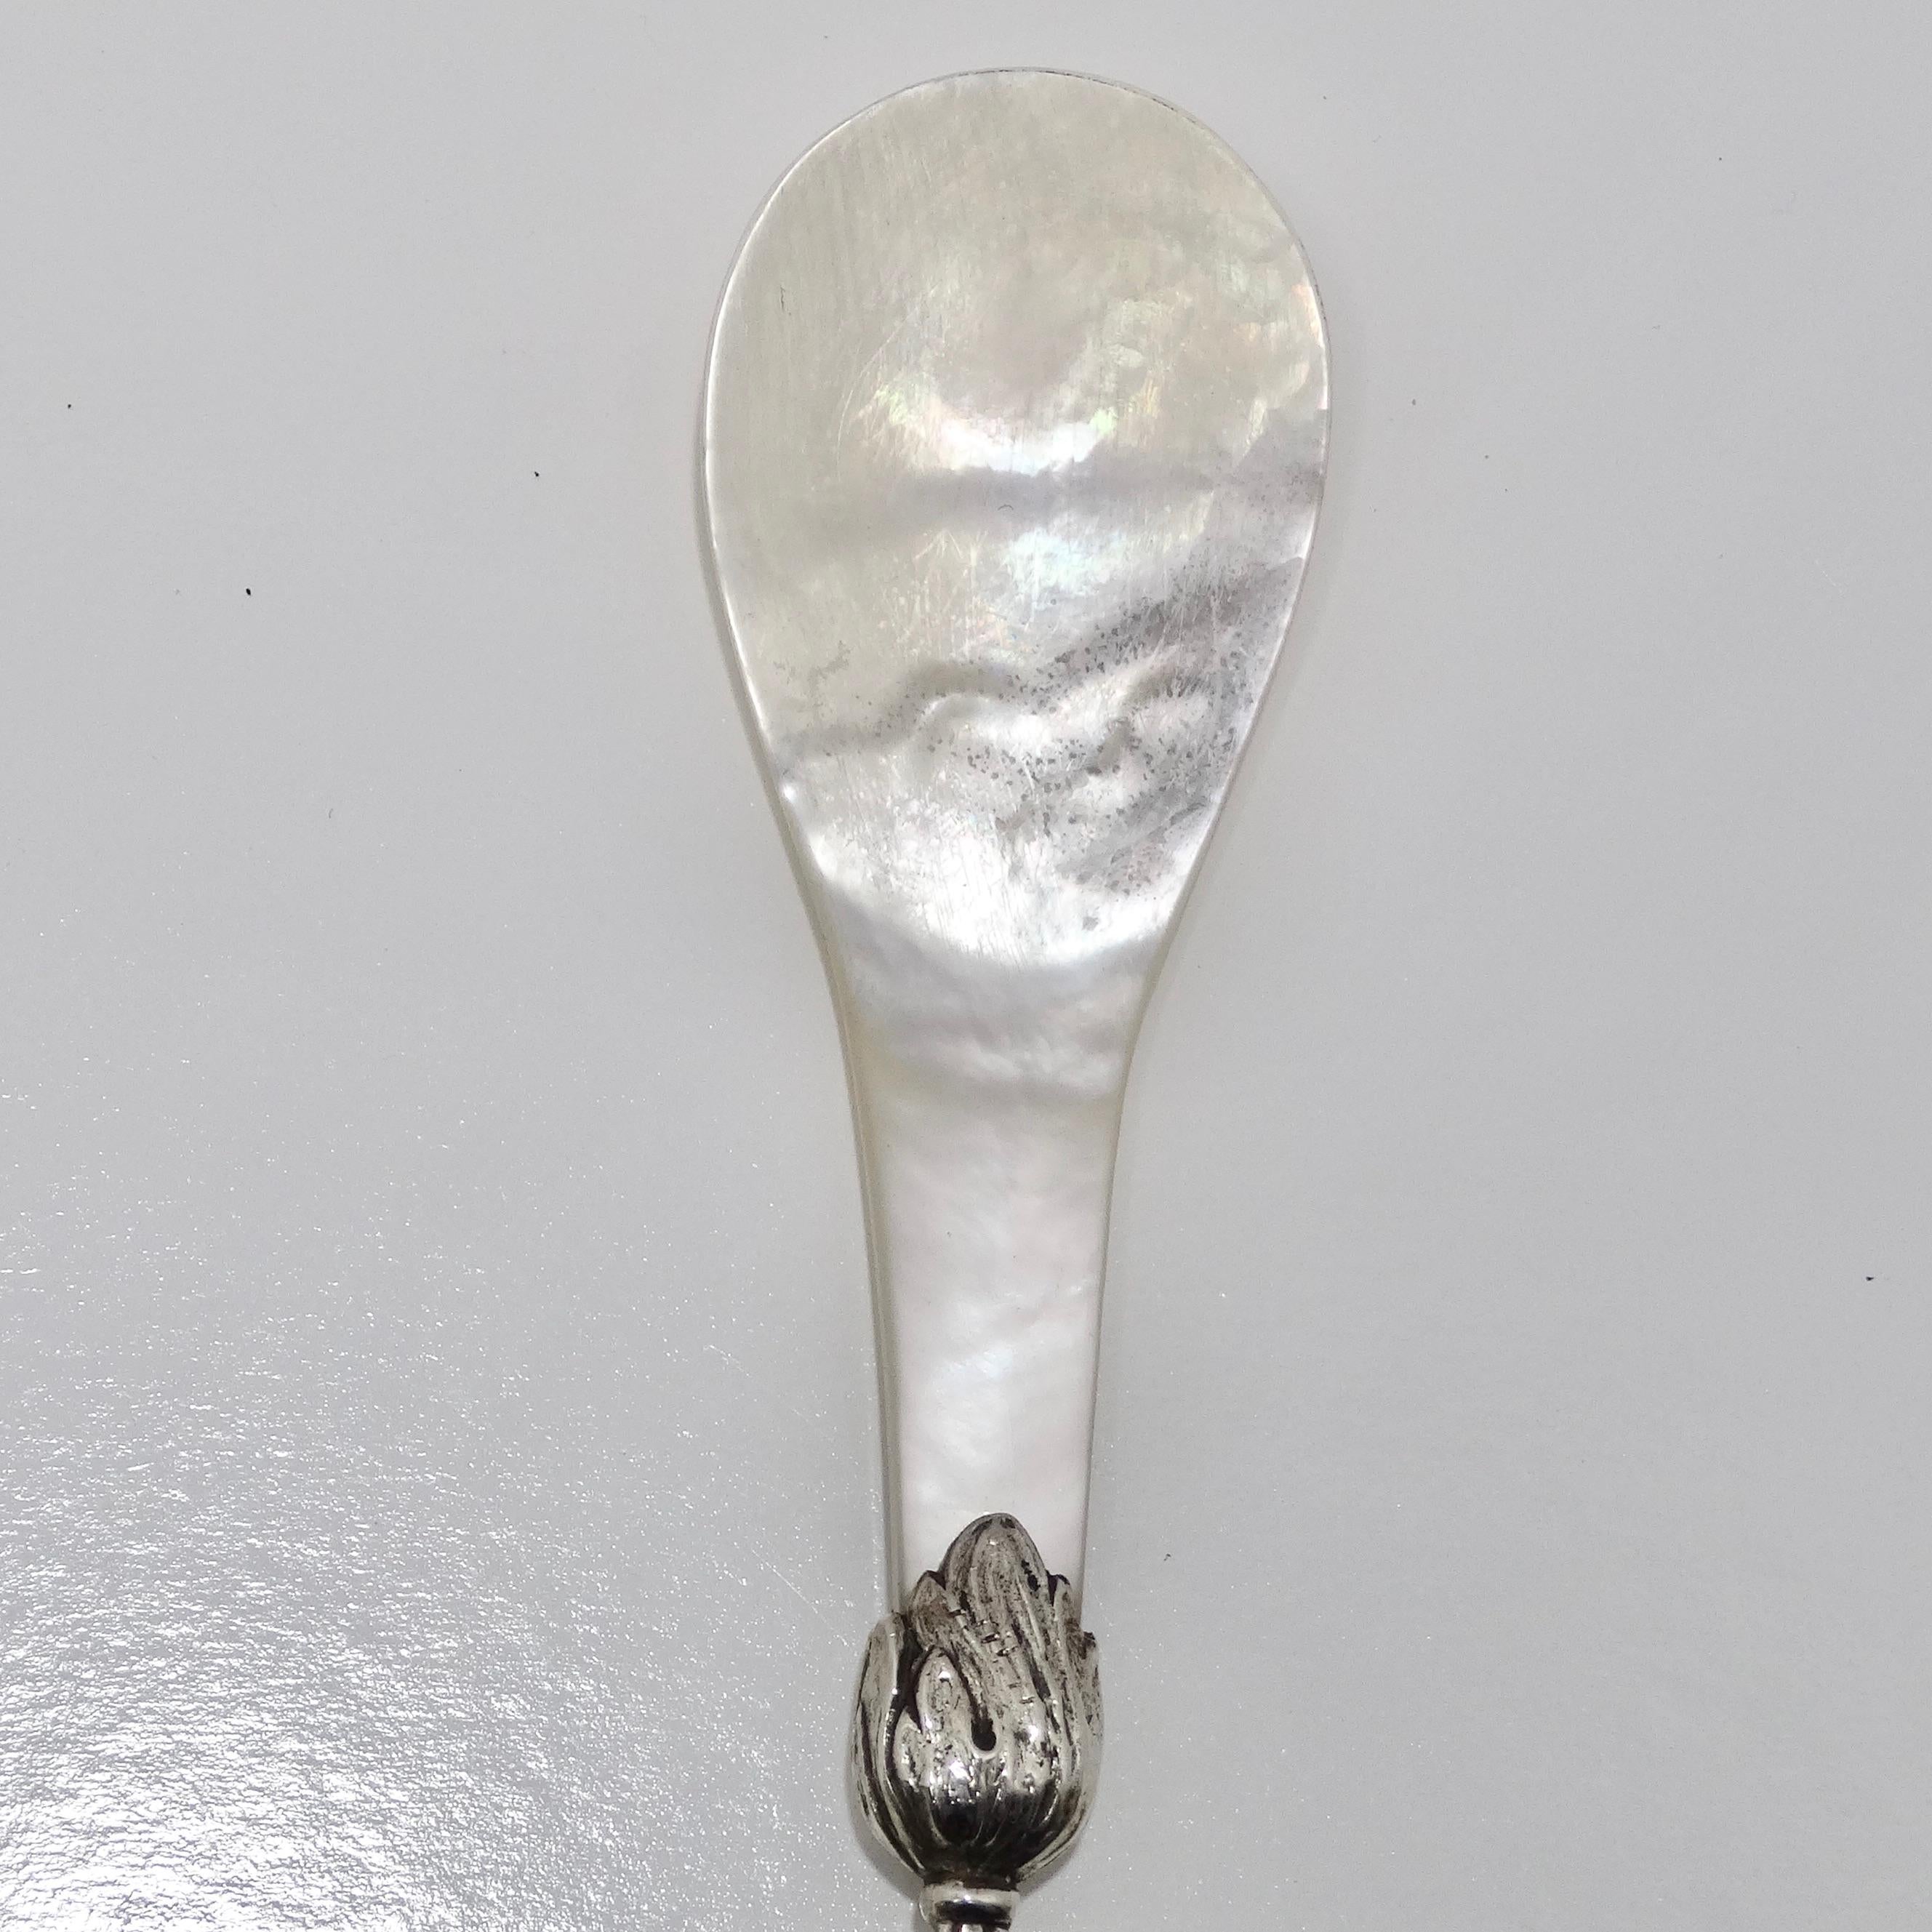 Introducing the Antique Christoph Widmann 925 Silver Shell Spoon, a breathtaking piece from the early 1900s that exudes timeless elegance and unparalleled beauty.

Crafted by the renowned silversmith Christoph Widmann, this spoon features a